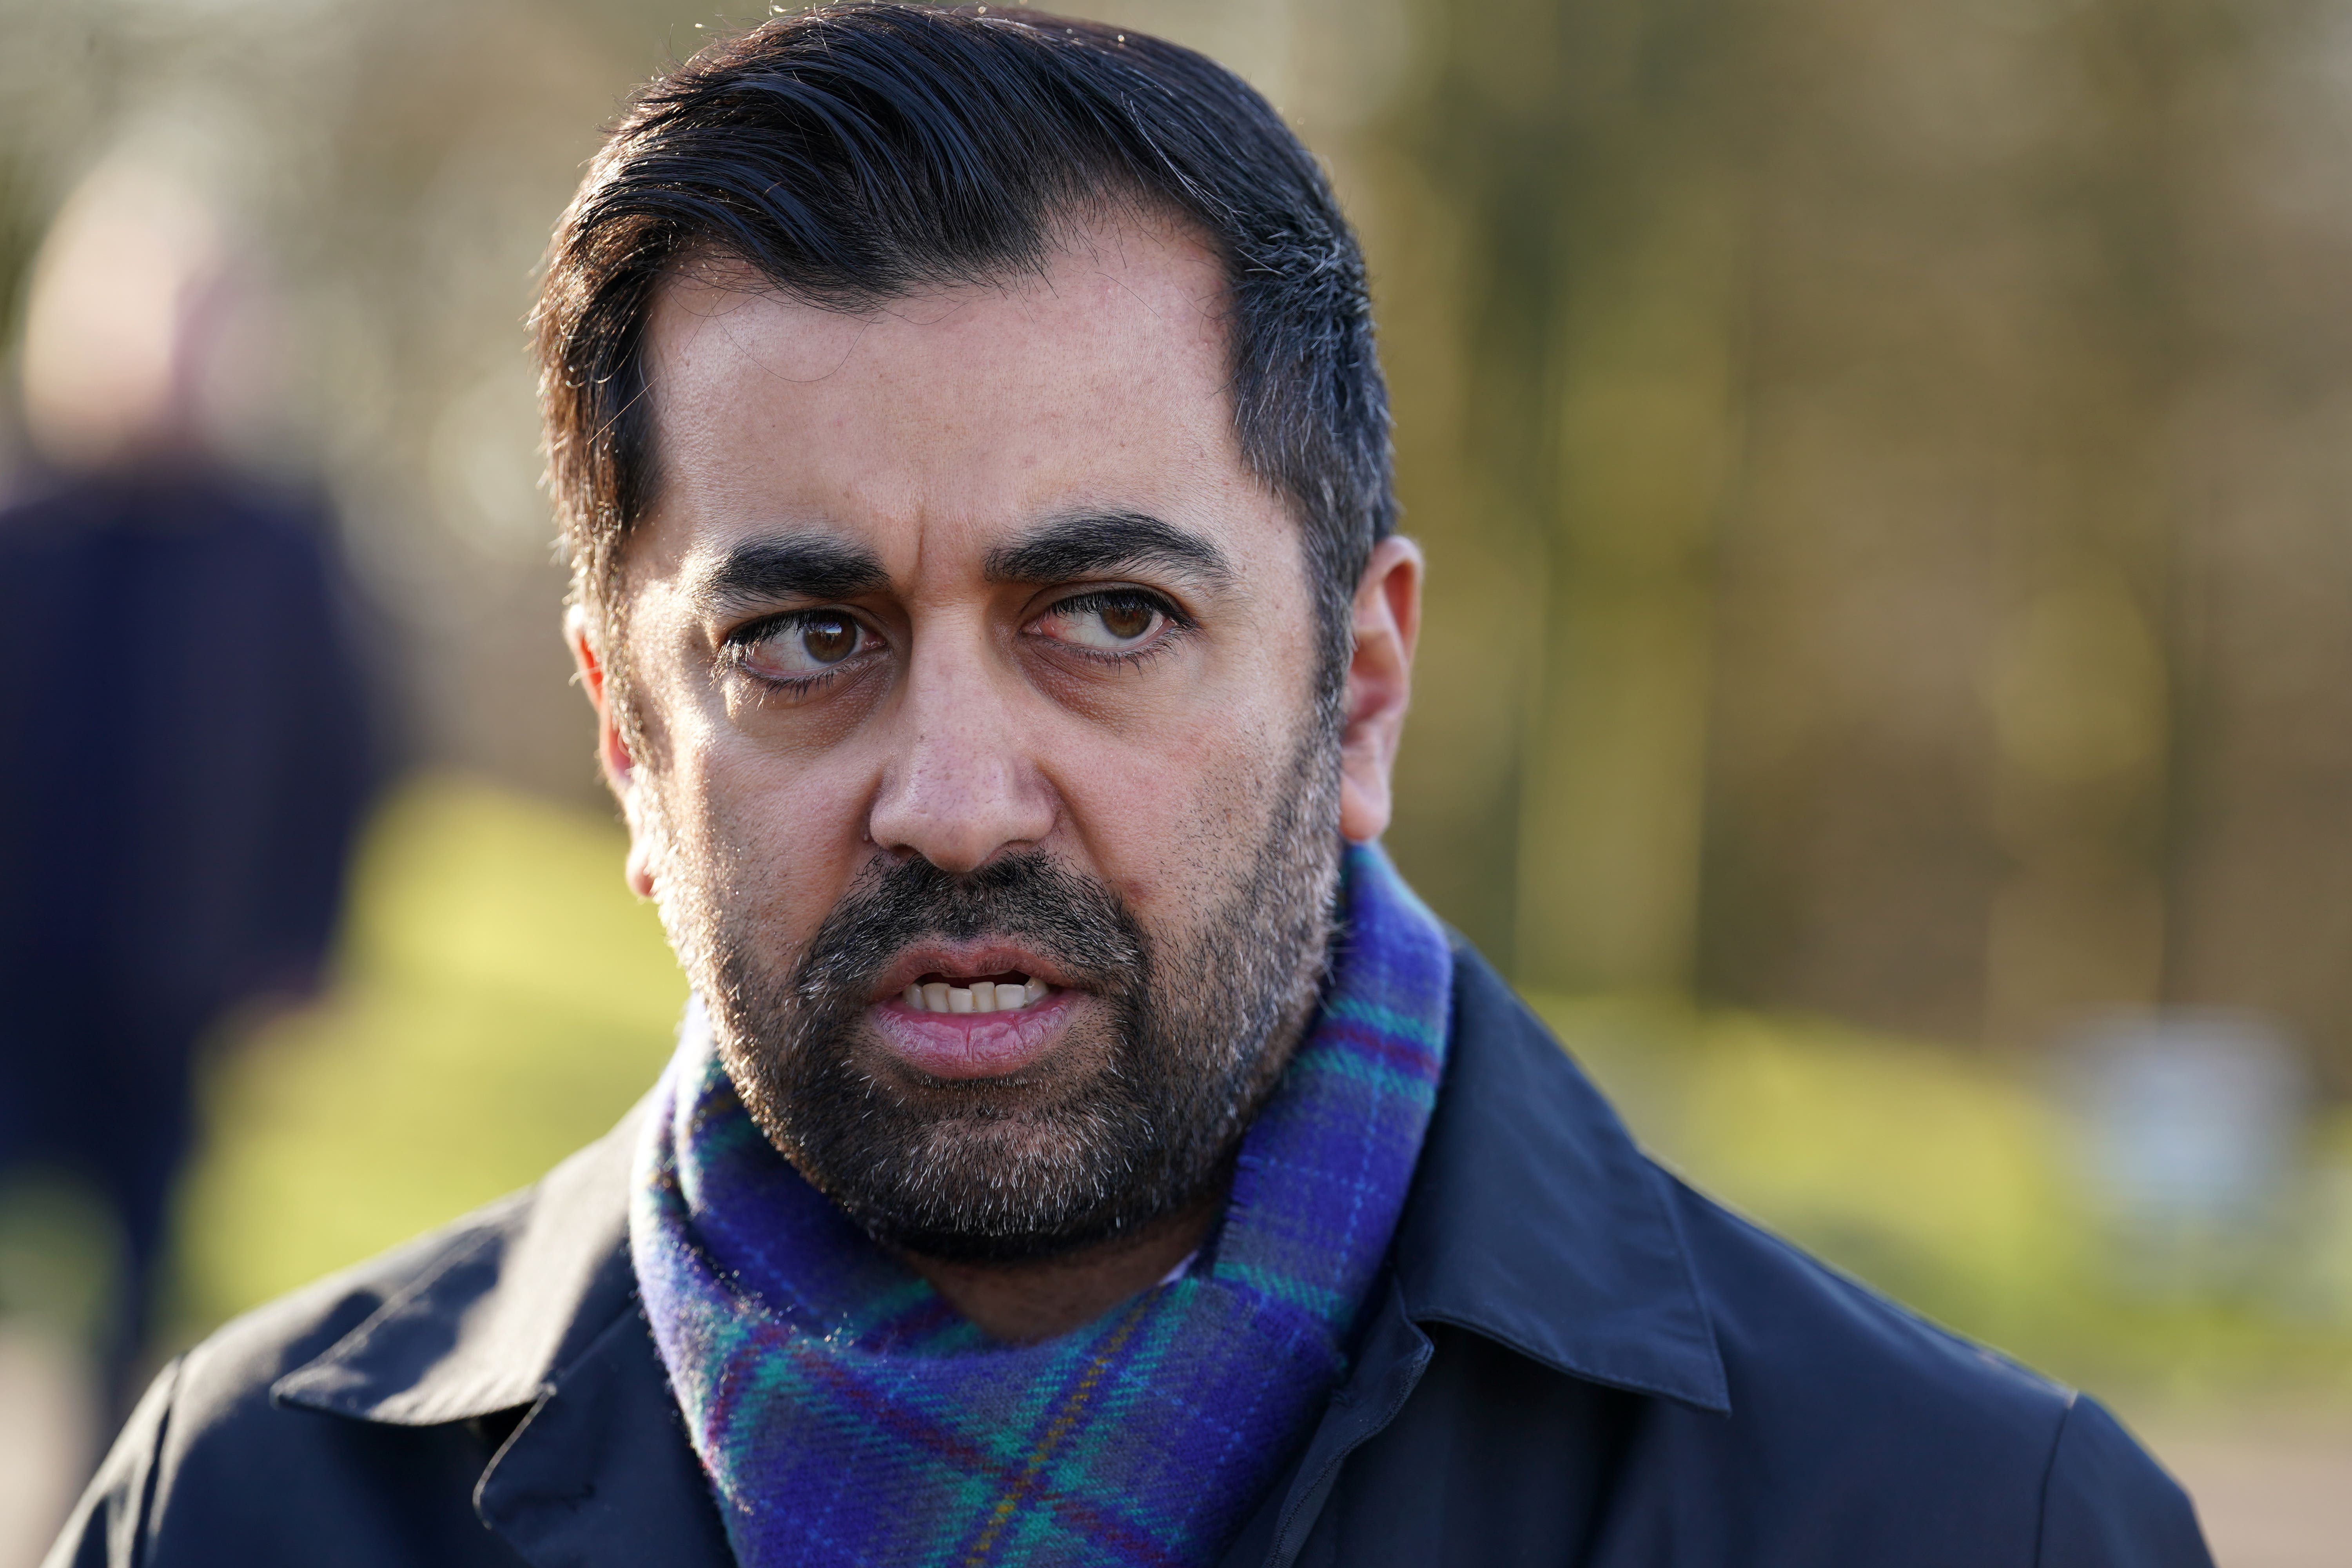 Humza Yousaf is facing to votes of no confidence after terminating the powersharing deal with the Scottish Greens